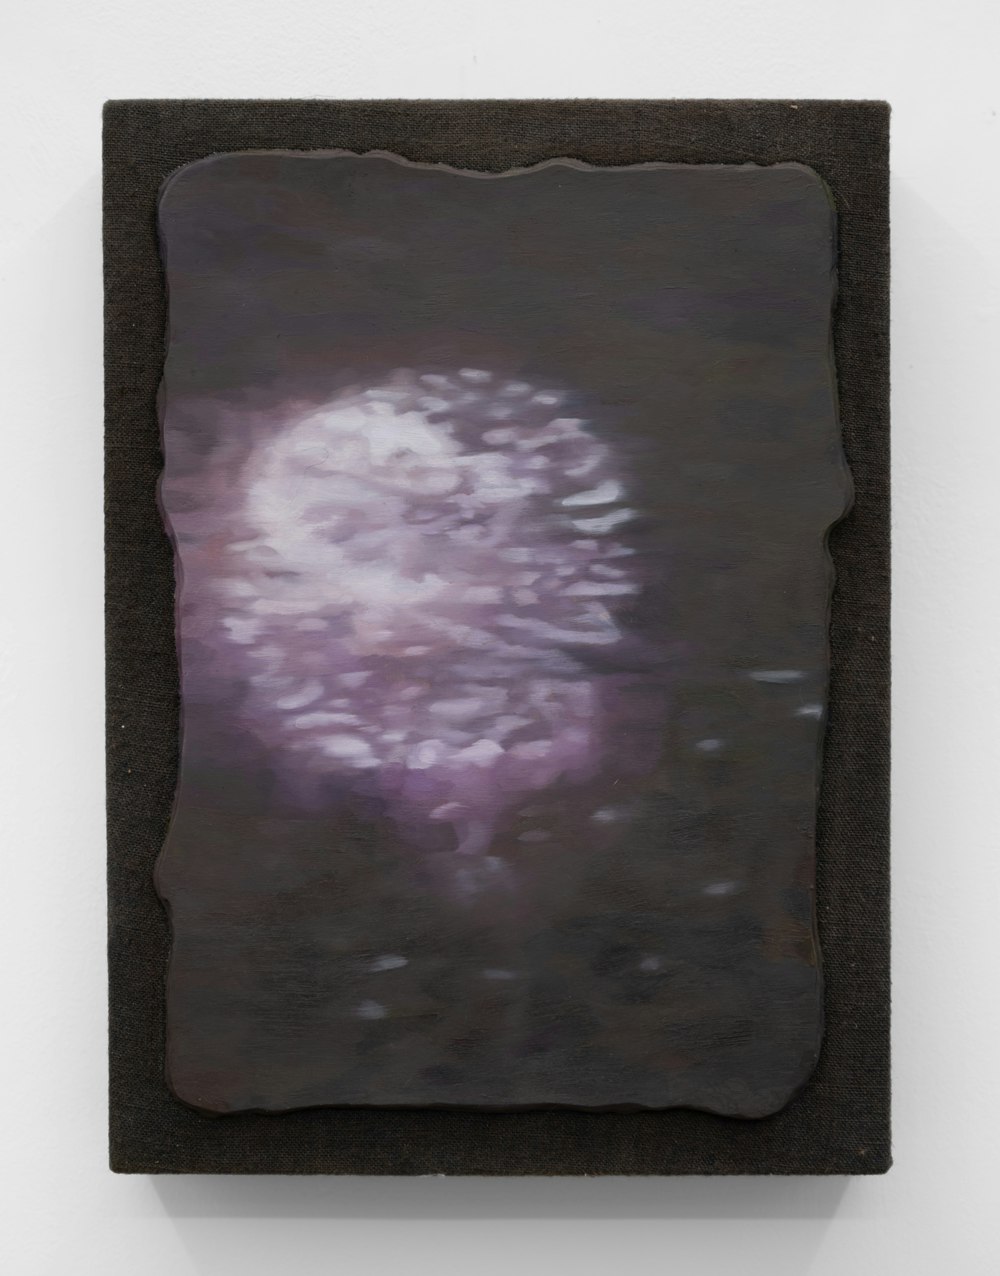 Stephen Deffet, <em>Metope: Fireworks</em> (2023). Oil on linen stretched panel, 12.25 x 9 inches. Courtesy the artist and Below Grand.